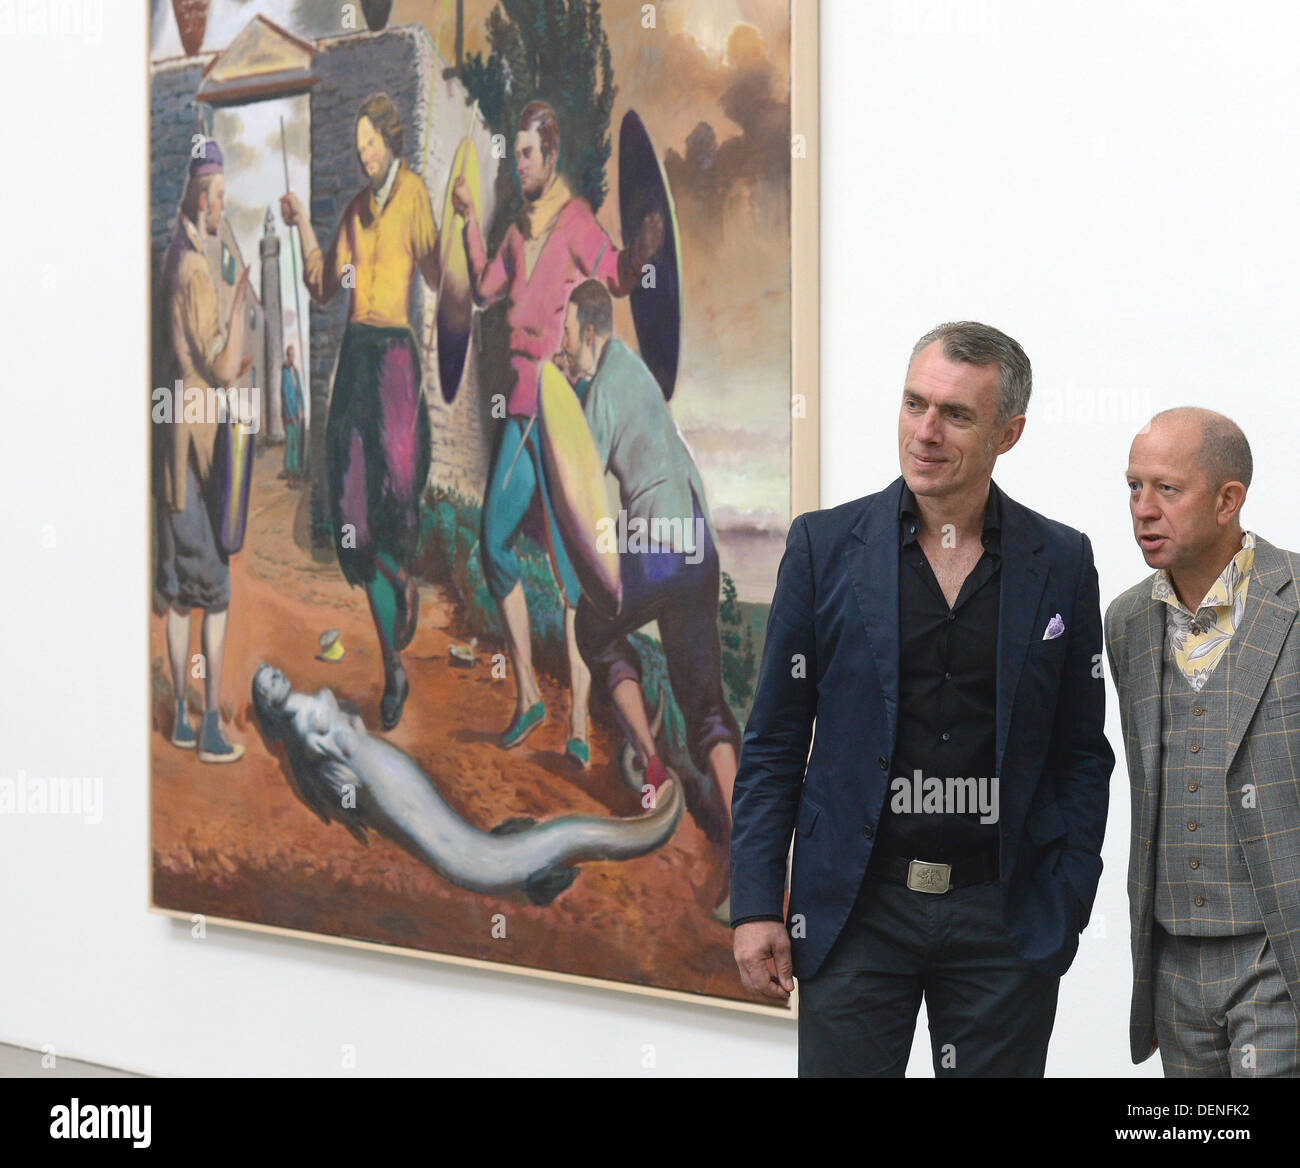 Painter Neo Rauch (L) and gallery owner Gerd Harry Lybke stand next to Rauch's painting 'Speertanz' at gallery Eigen + Art' in Leipzig, Germany, 21 September 2013. The gallery presents Rauch's new works as part of the tour of Spinnerei galleries. Photo: Hendrik Schmidt Stock Photo